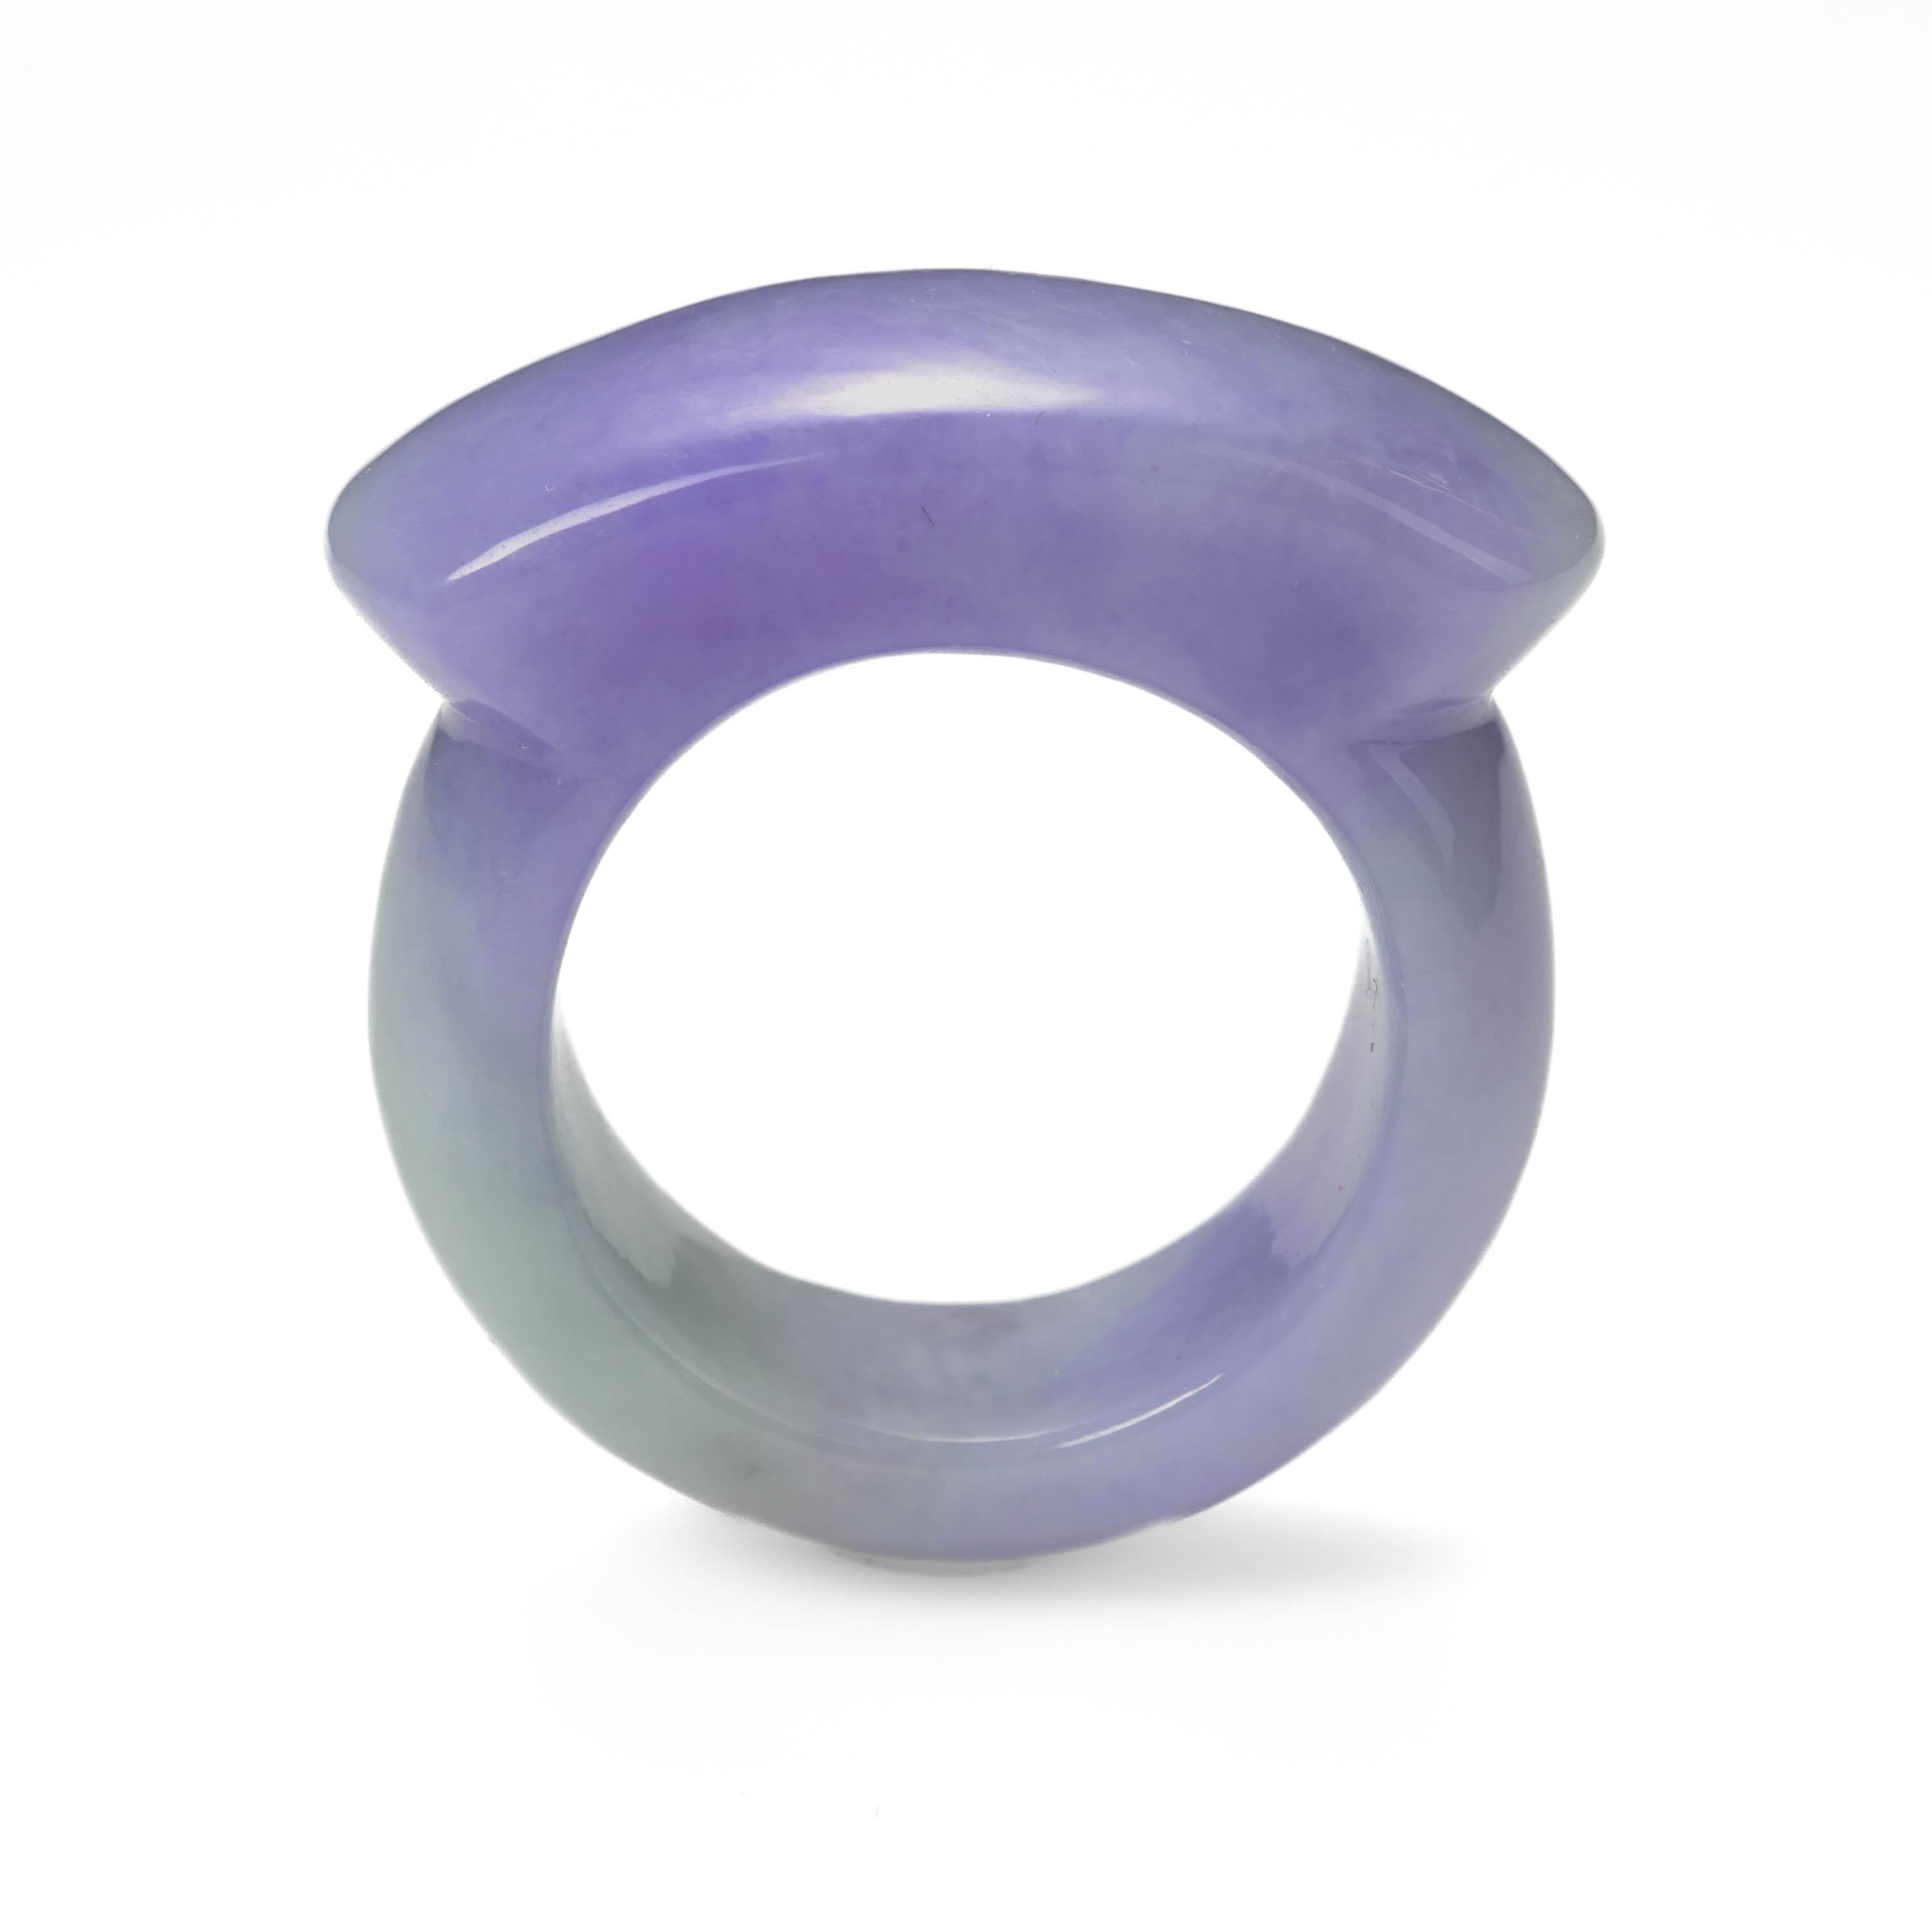 This extraordinary ring was hand-carved from a single piece or natural and untreated GIA-Certified Burmese jadeite jade. The translucent stone is purple with a hint of light green.  Click on the image of the GIA certificate and you will see that it